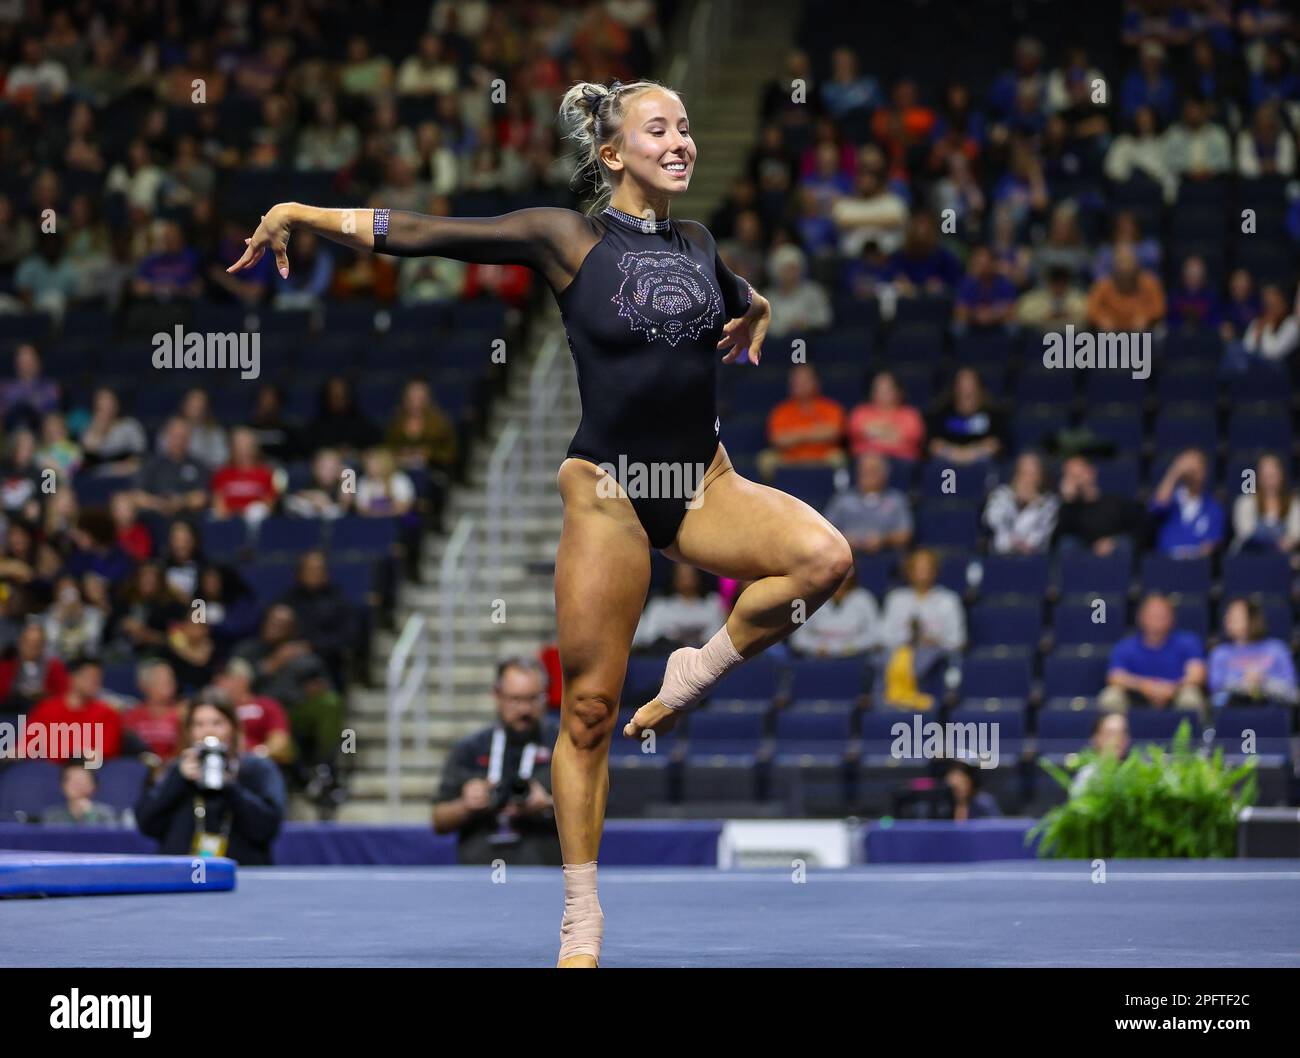 March 18, 2023: Georgia's Haley de Jong competes on the floor exercise ...